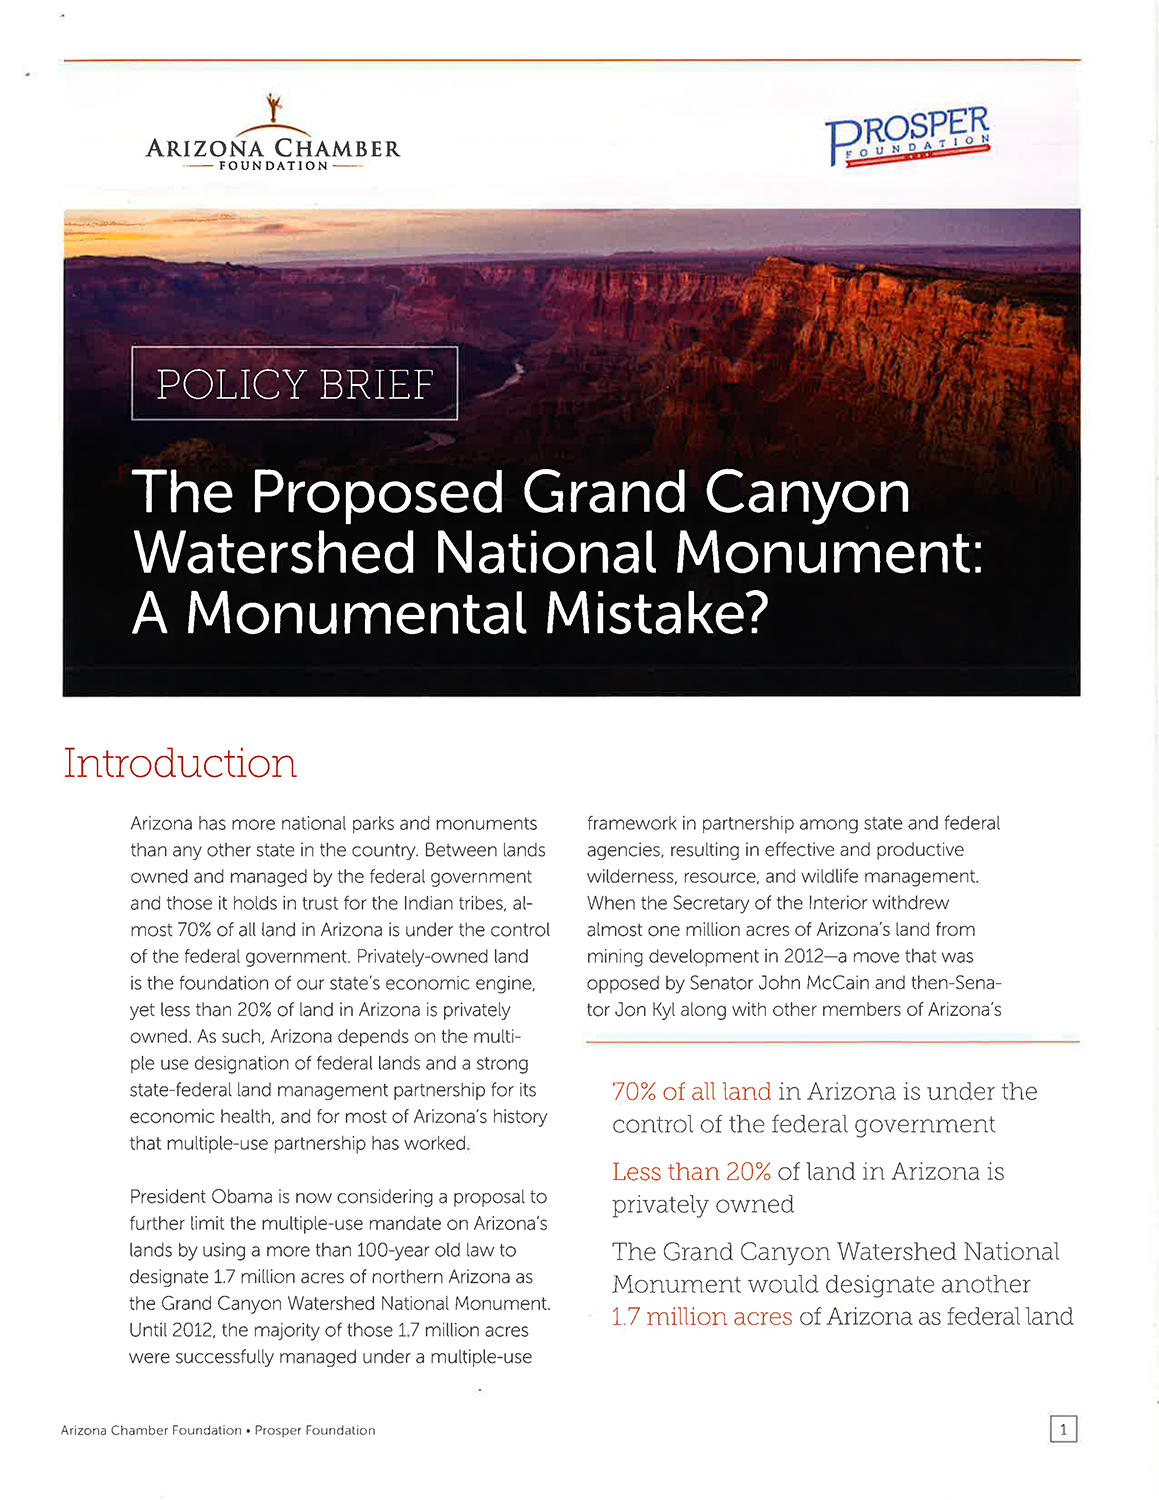 Grand Canyon Monument policy brief